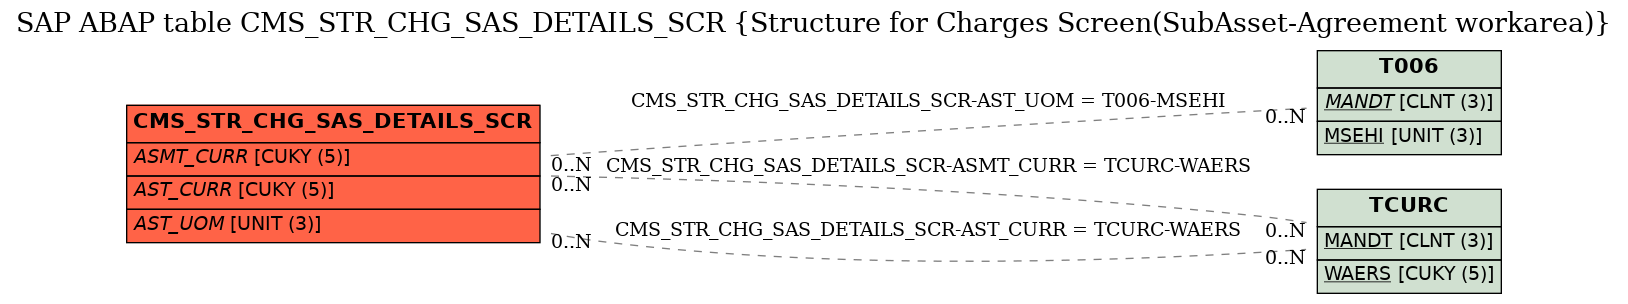 E-R Diagram for table CMS_STR_CHG_SAS_DETAILS_SCR (Structure for Charges Screen(SubAsset-Agreement workarea))